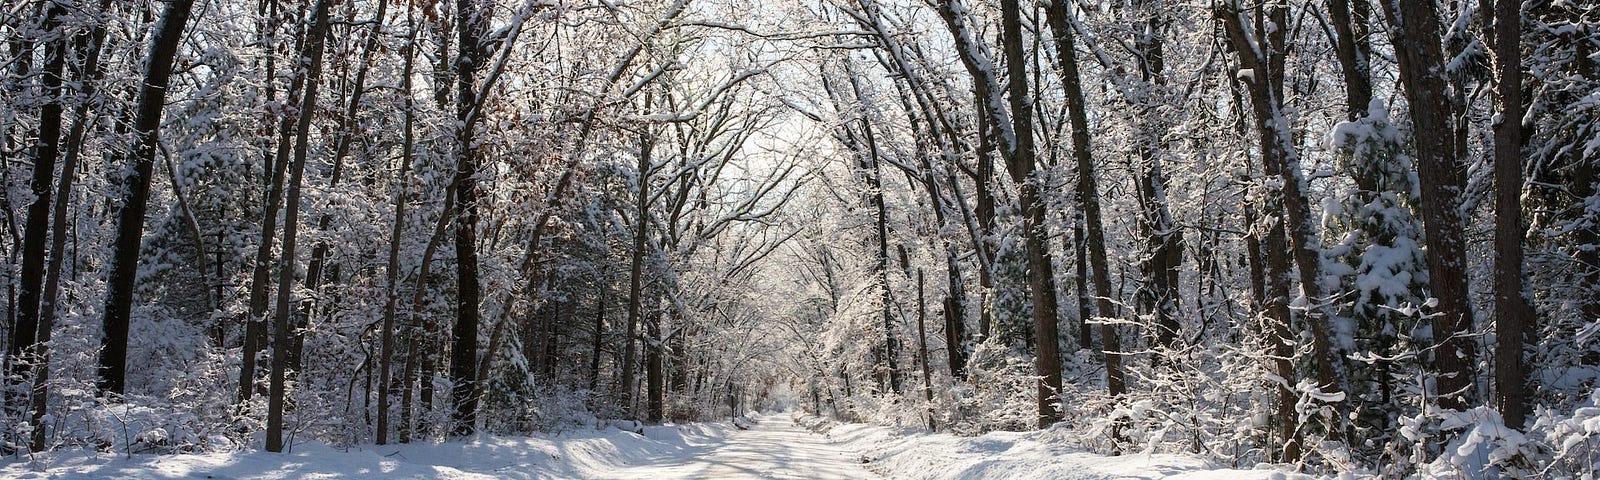 snowy dirt road in the woods